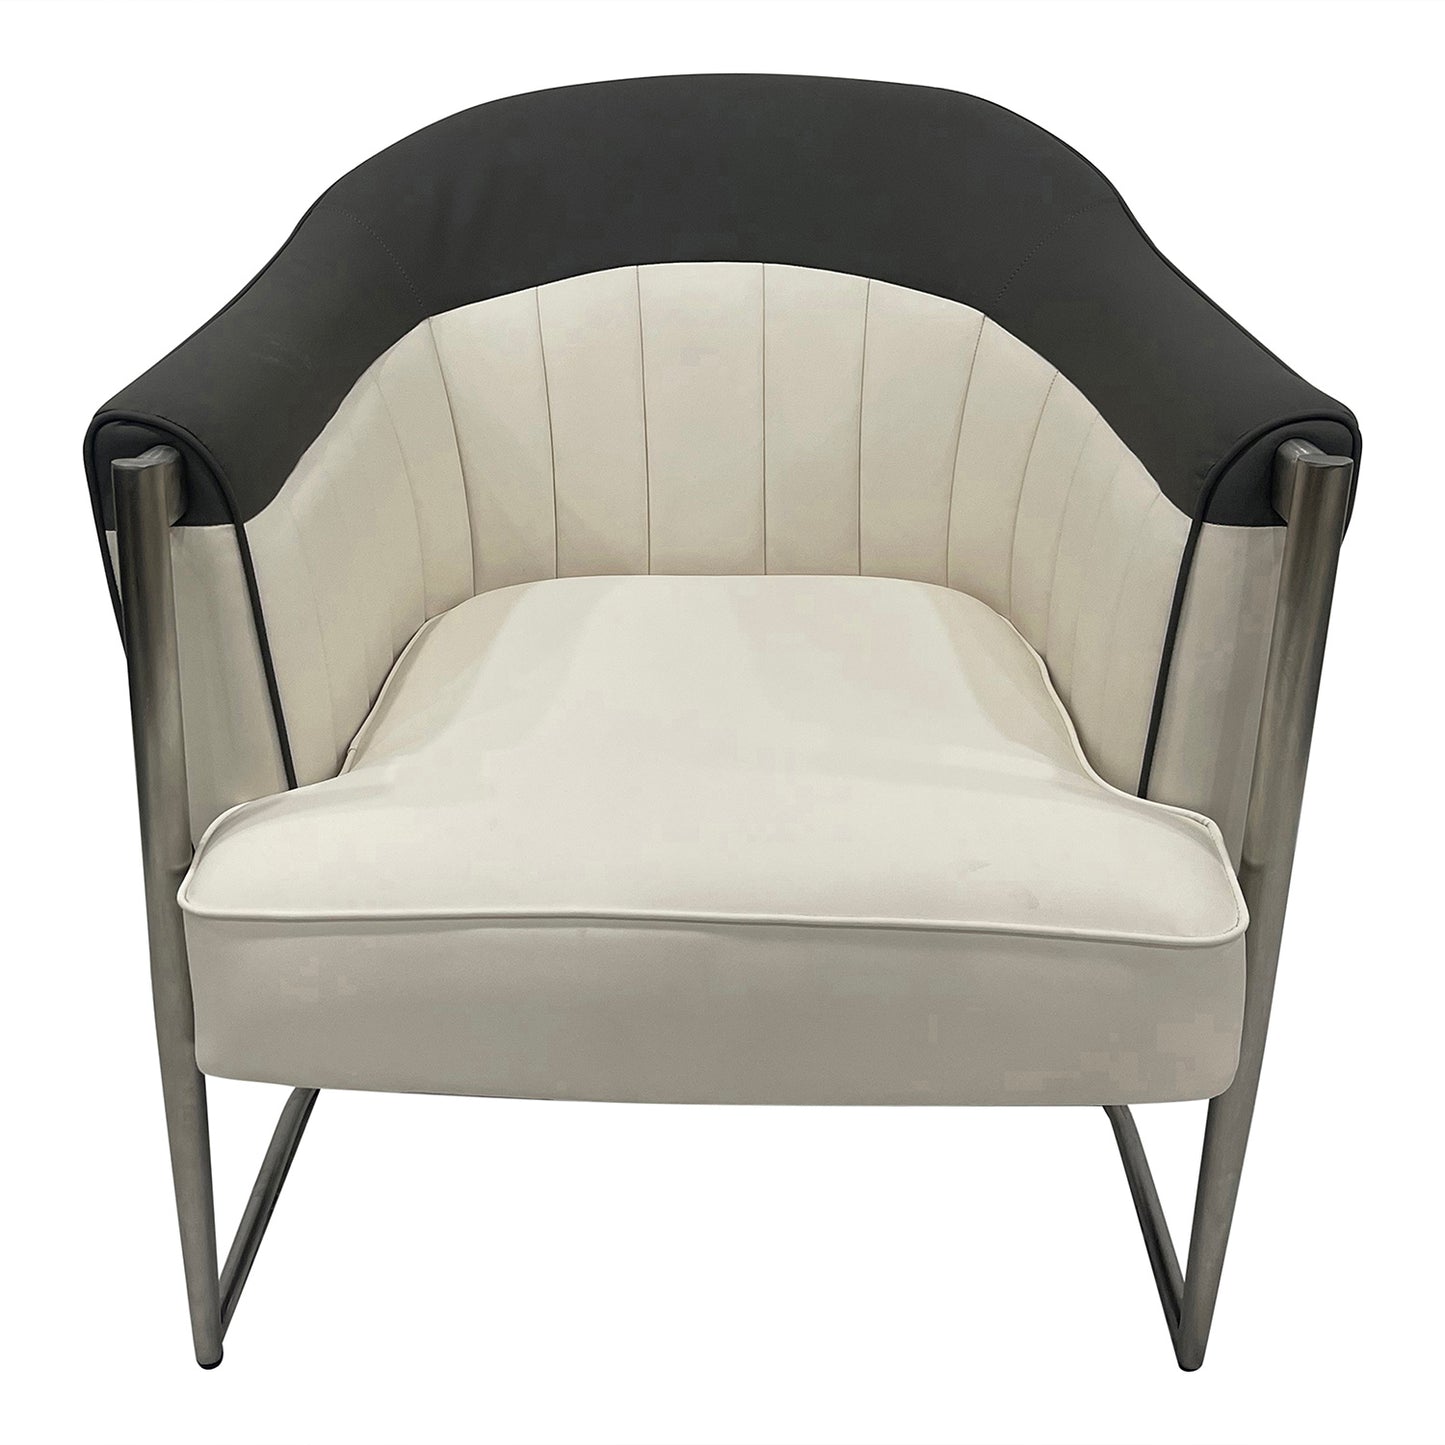 Grandon Modern Leatherette Accent Chair - Off-White & Gray